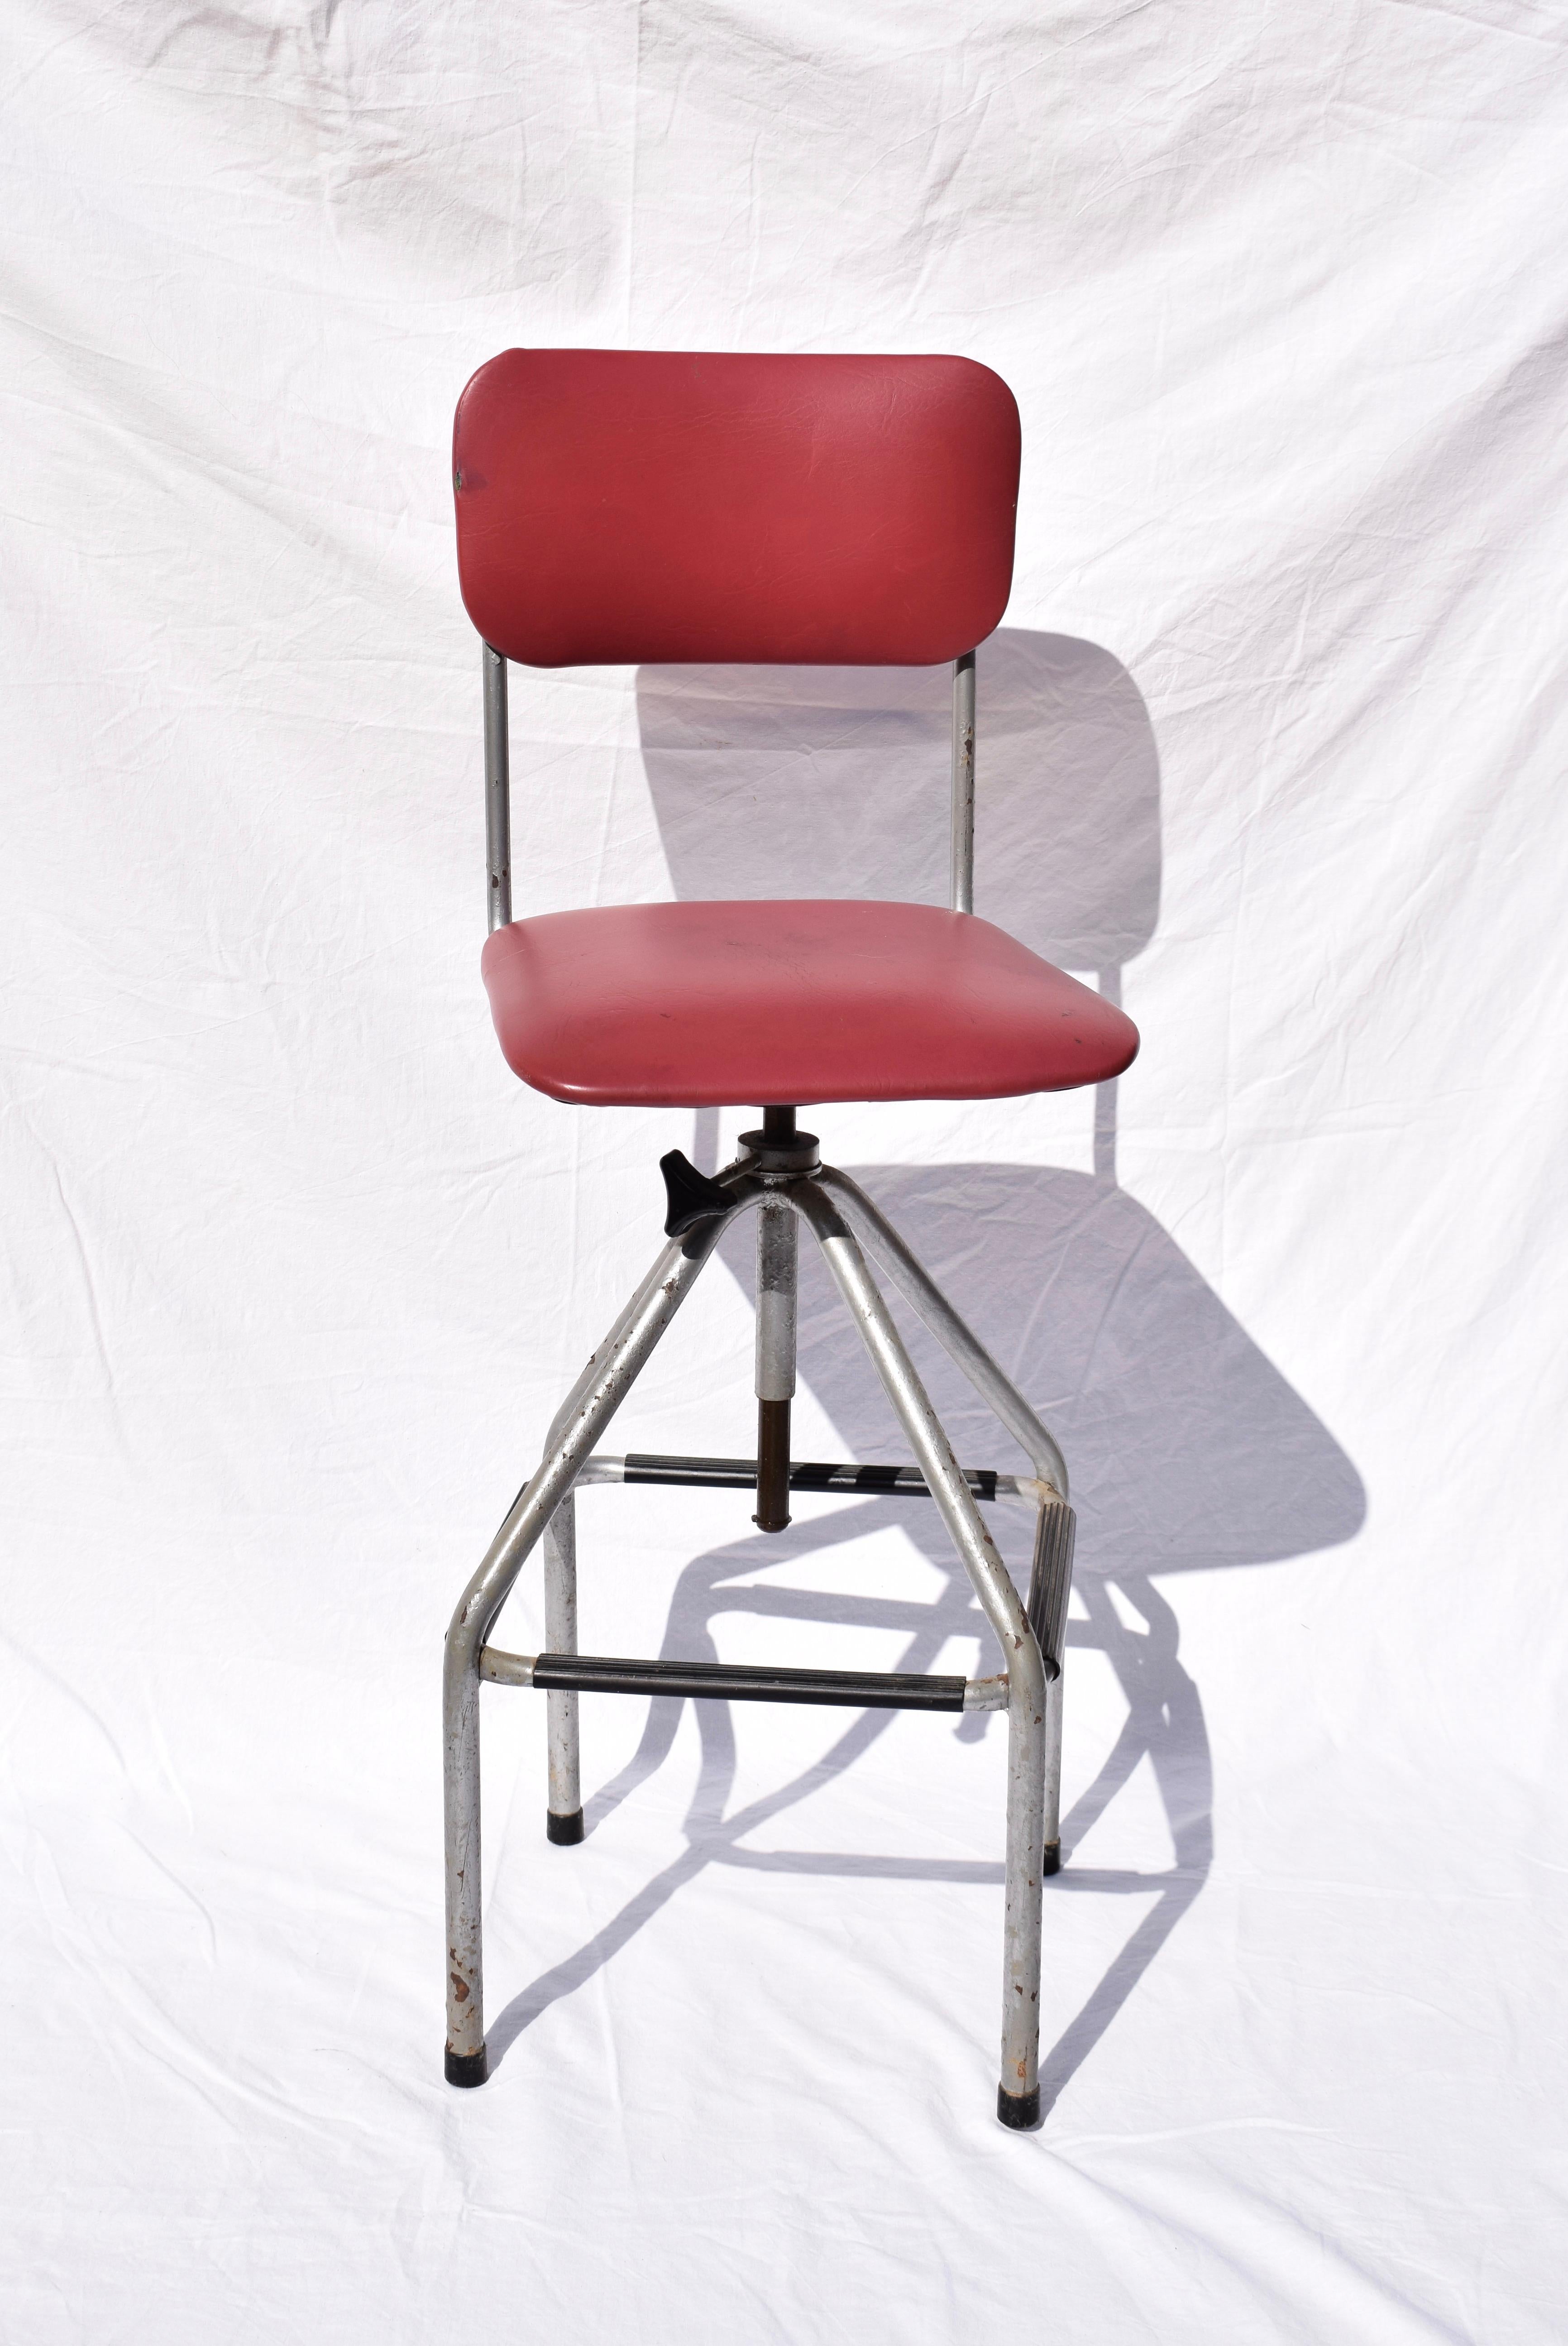 A tall English drafting or as an operators chair probably from the 1940s - 1950s. It would have been used by a telephone operator which means that the stool has been designed with practical features to make it comfortable to use. The seat is